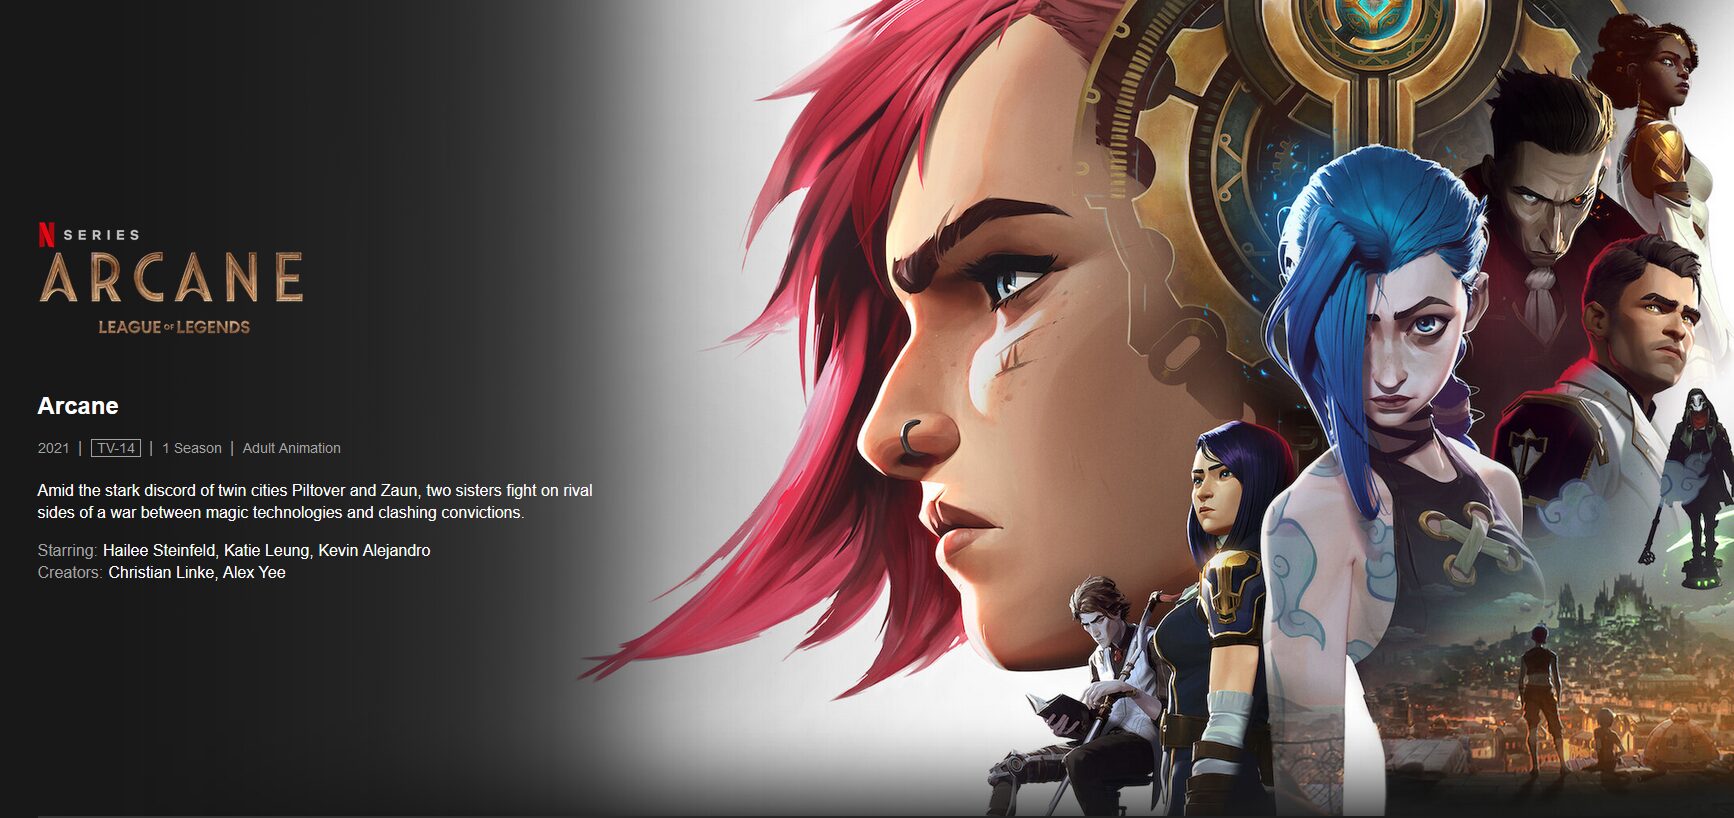 Riot Apologizes To Artist For DMCA Striking Them Over Use Of Word “Arcane”